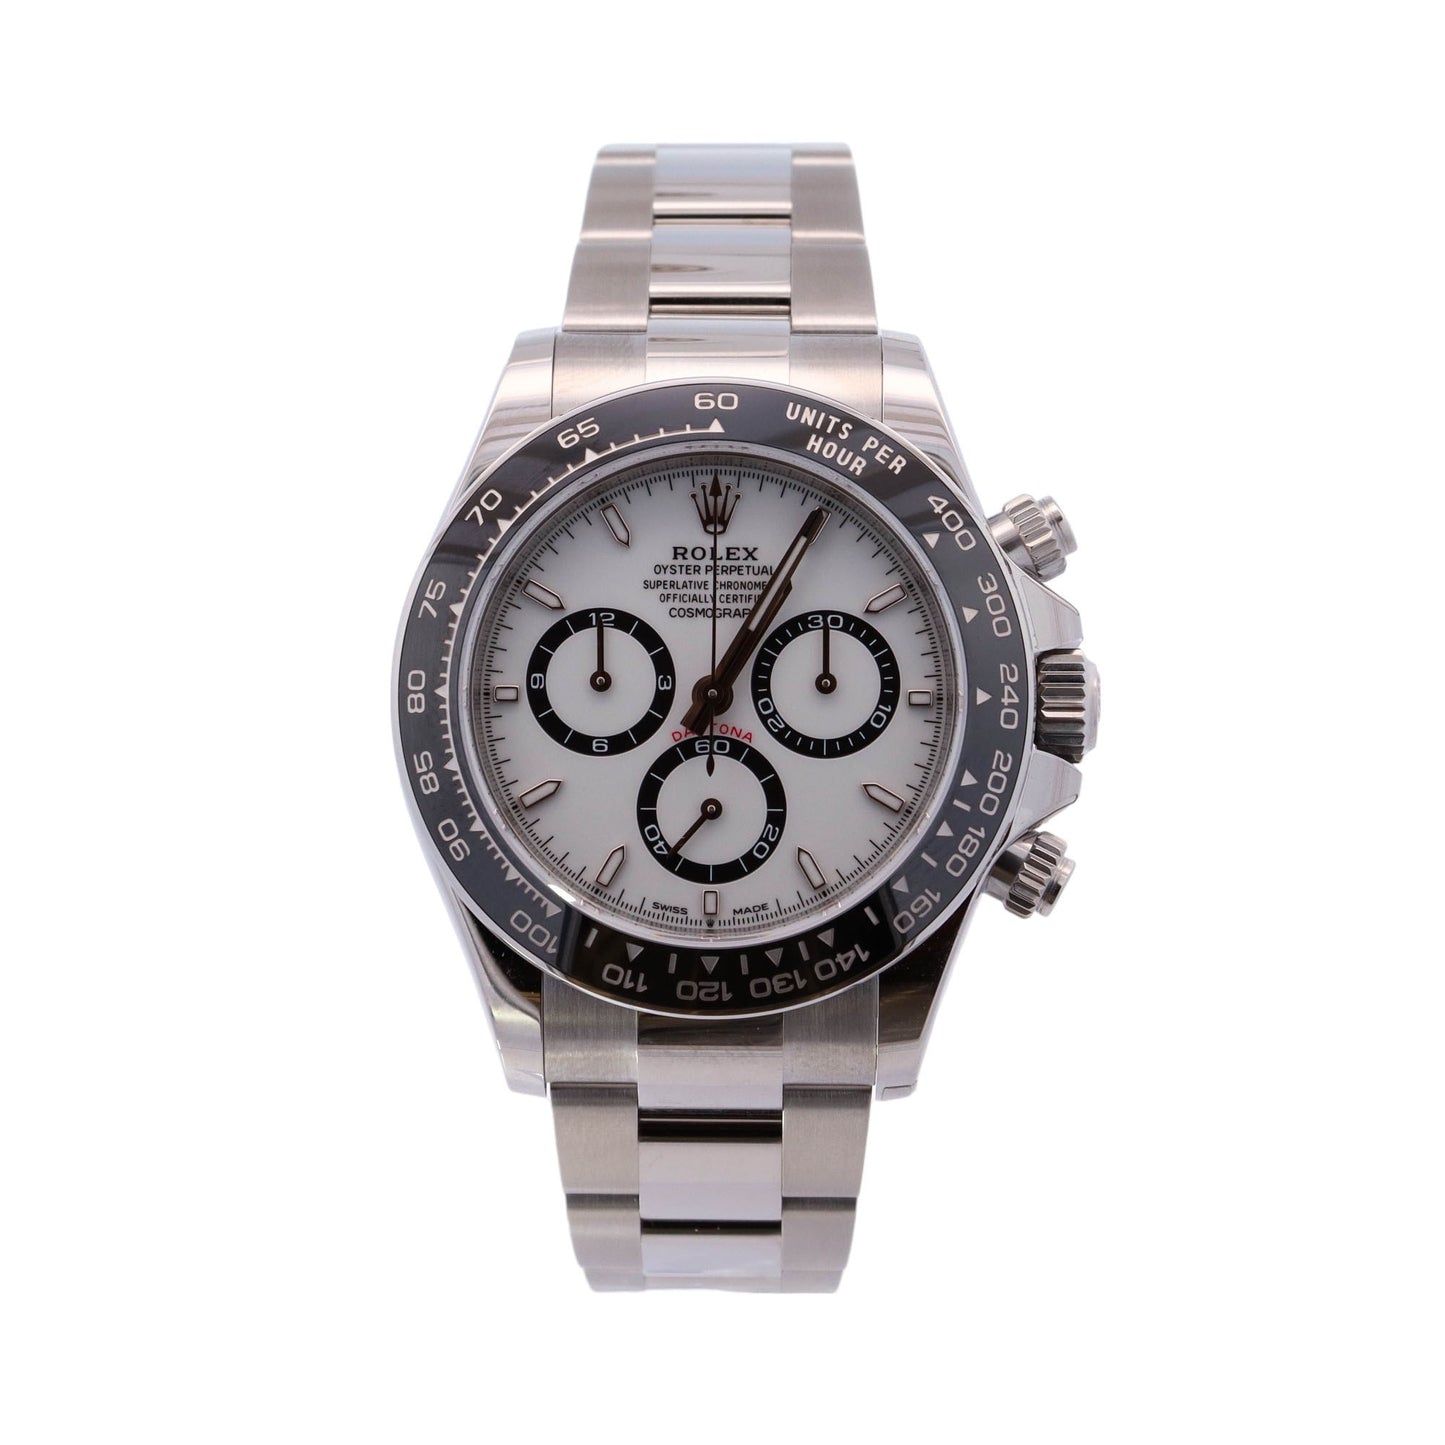 Rolex Daytona "Panda" Stainless Steel 40mm White Chronograph Dial Watch Reference #: 126500LN